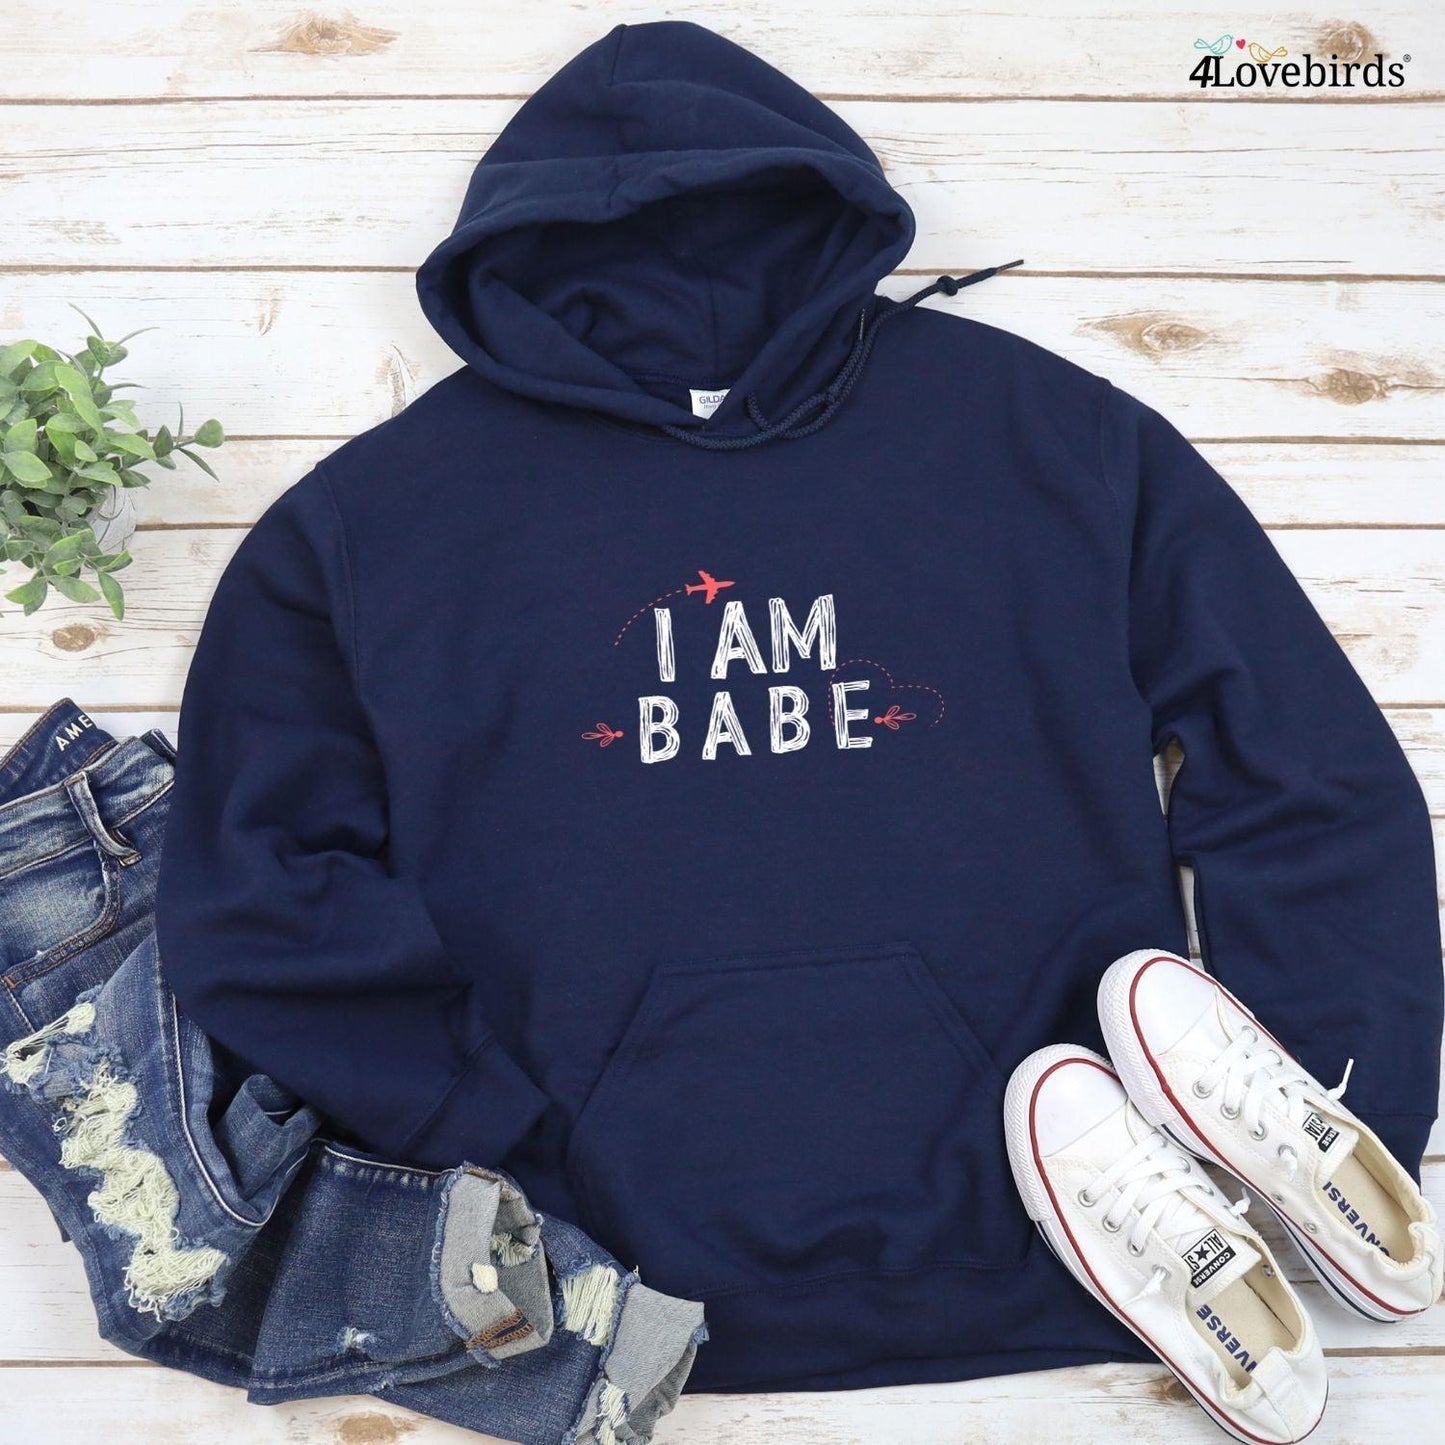 Valentines Matching Set: 'If Lost Return To Babe' Couple Outfits - 4Lovebirds